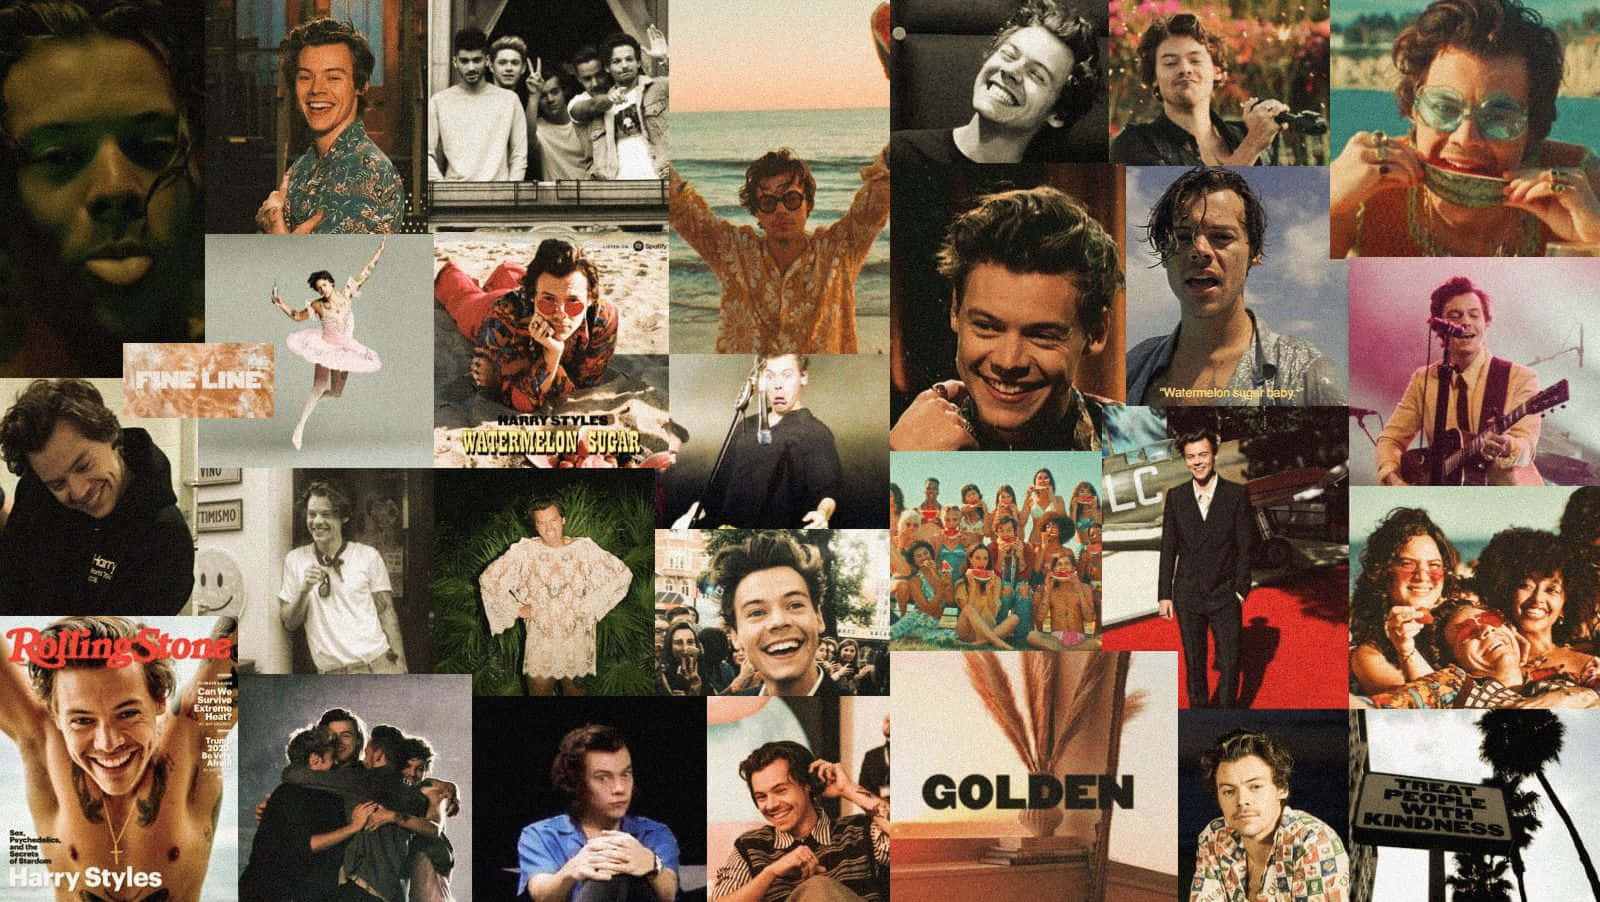 Download Harry Styles: A True Iconic Star Wallpaper